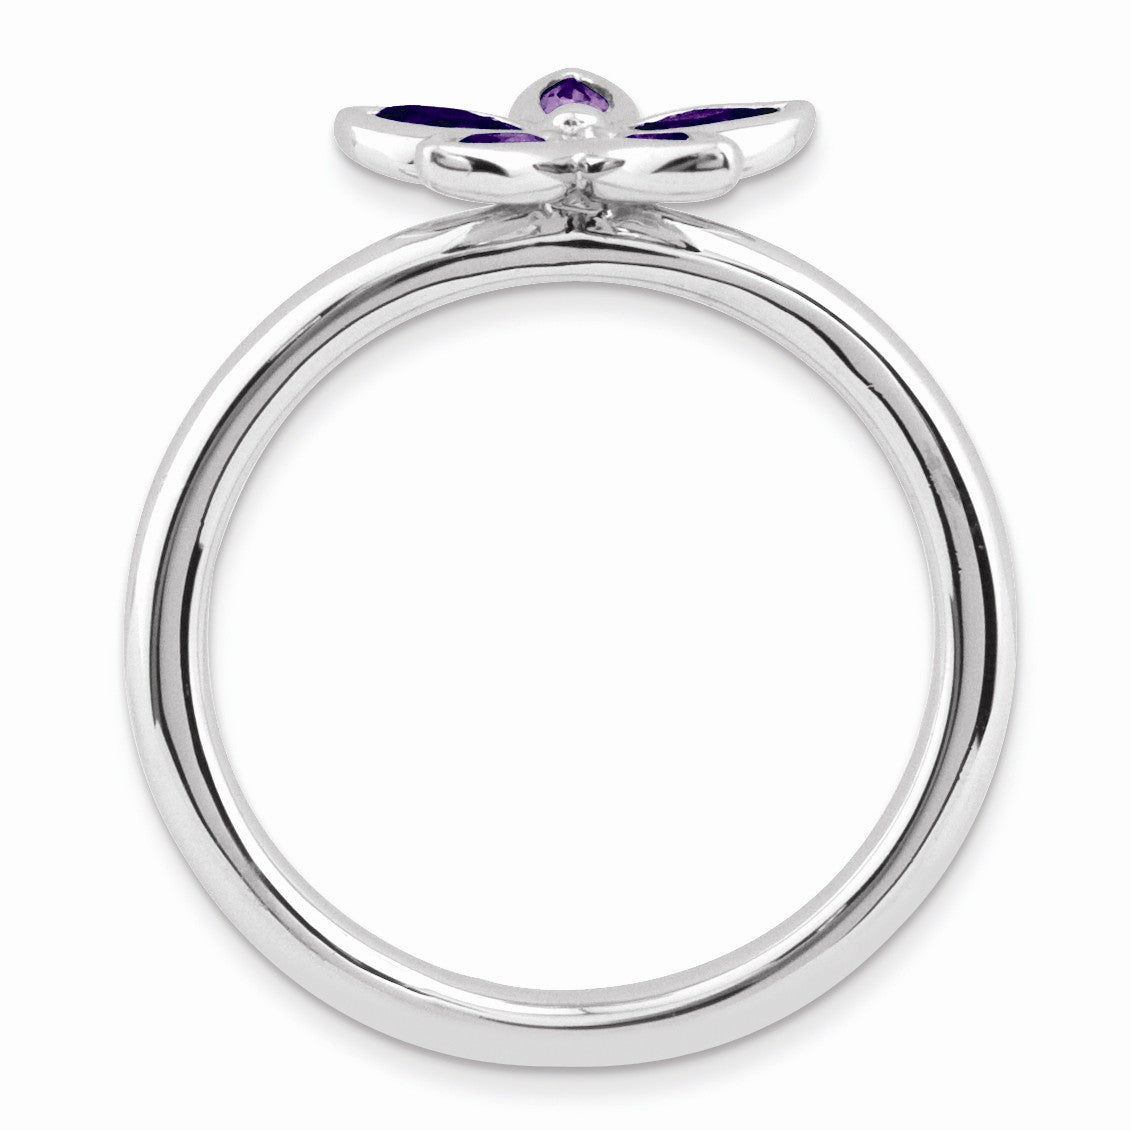 Alternate view of the Sterling Silver &amp; Amethyst Stackable 5 Marquise Stone Flower Ring by The Black Bow Jewelry Co.